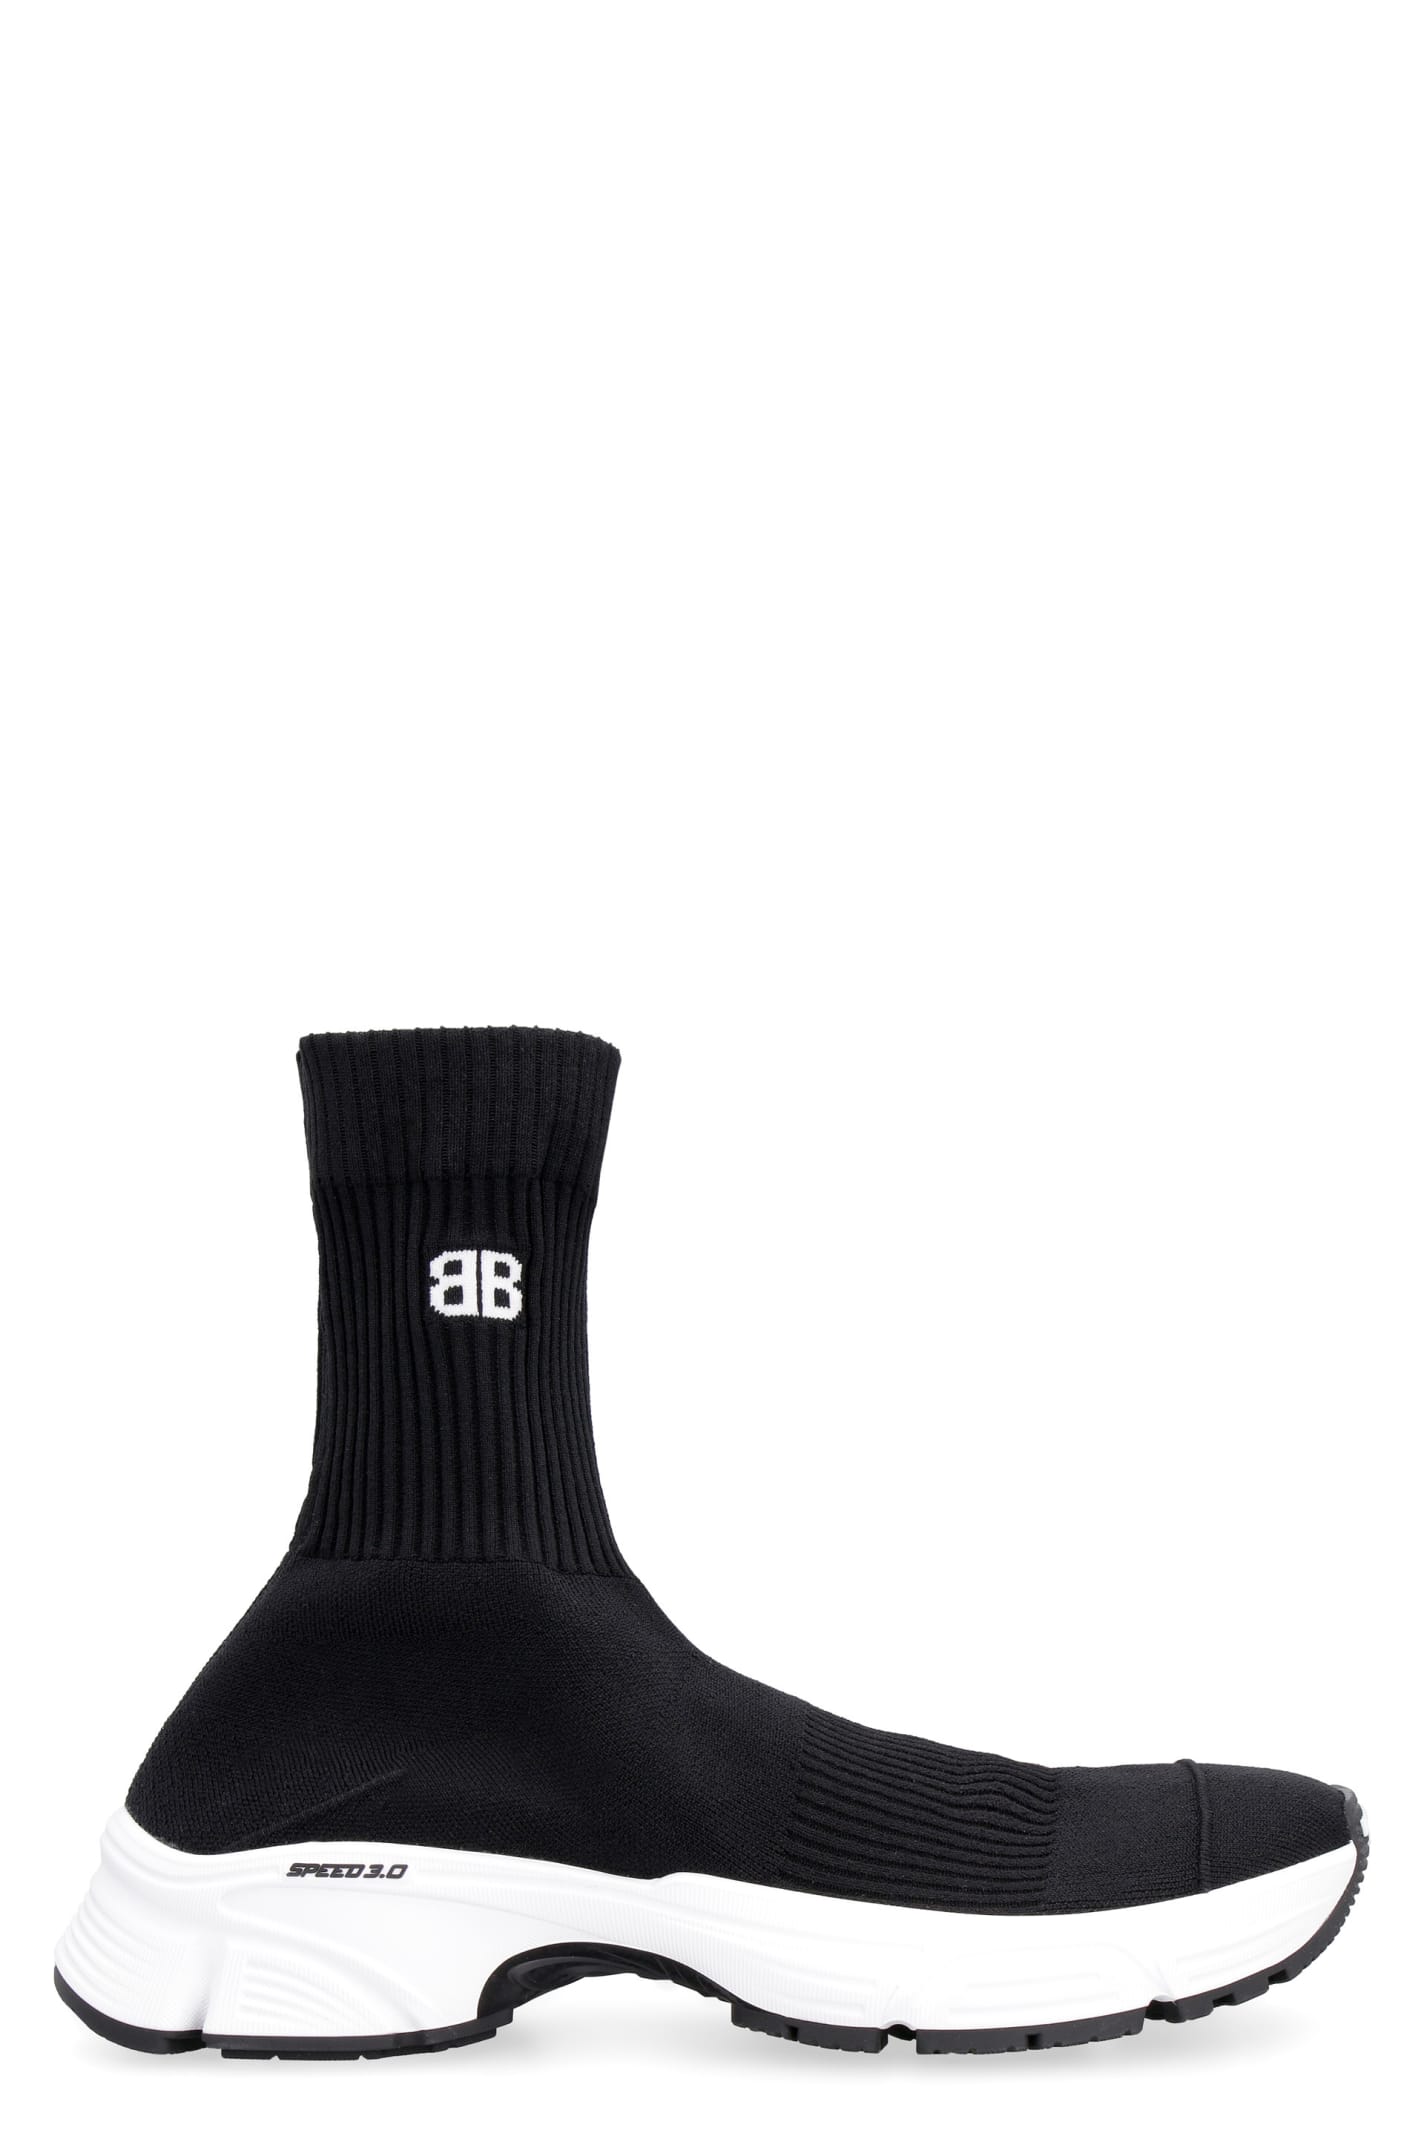 Balenciaga Speed 3.0 Knitted Sock-sneakers